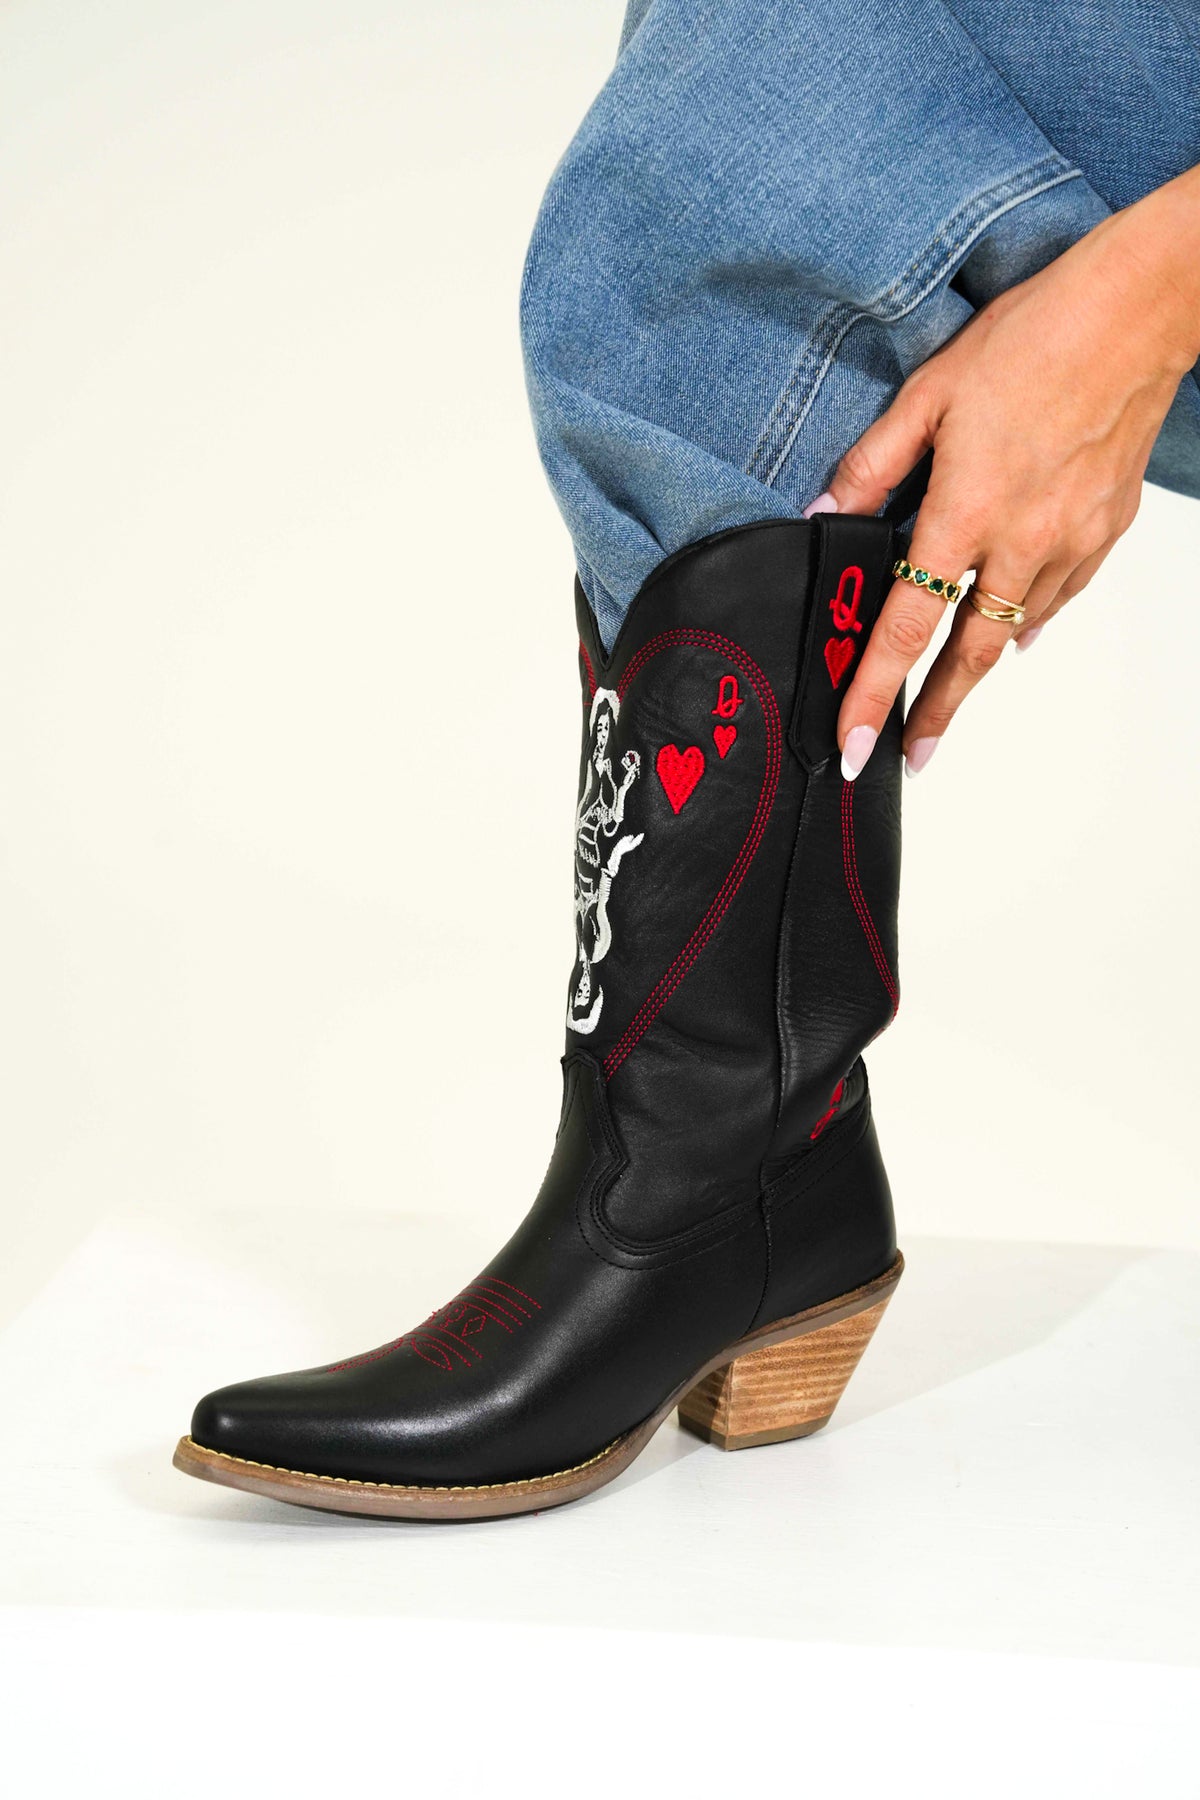 Queen A Hearts Leather Boot in Black